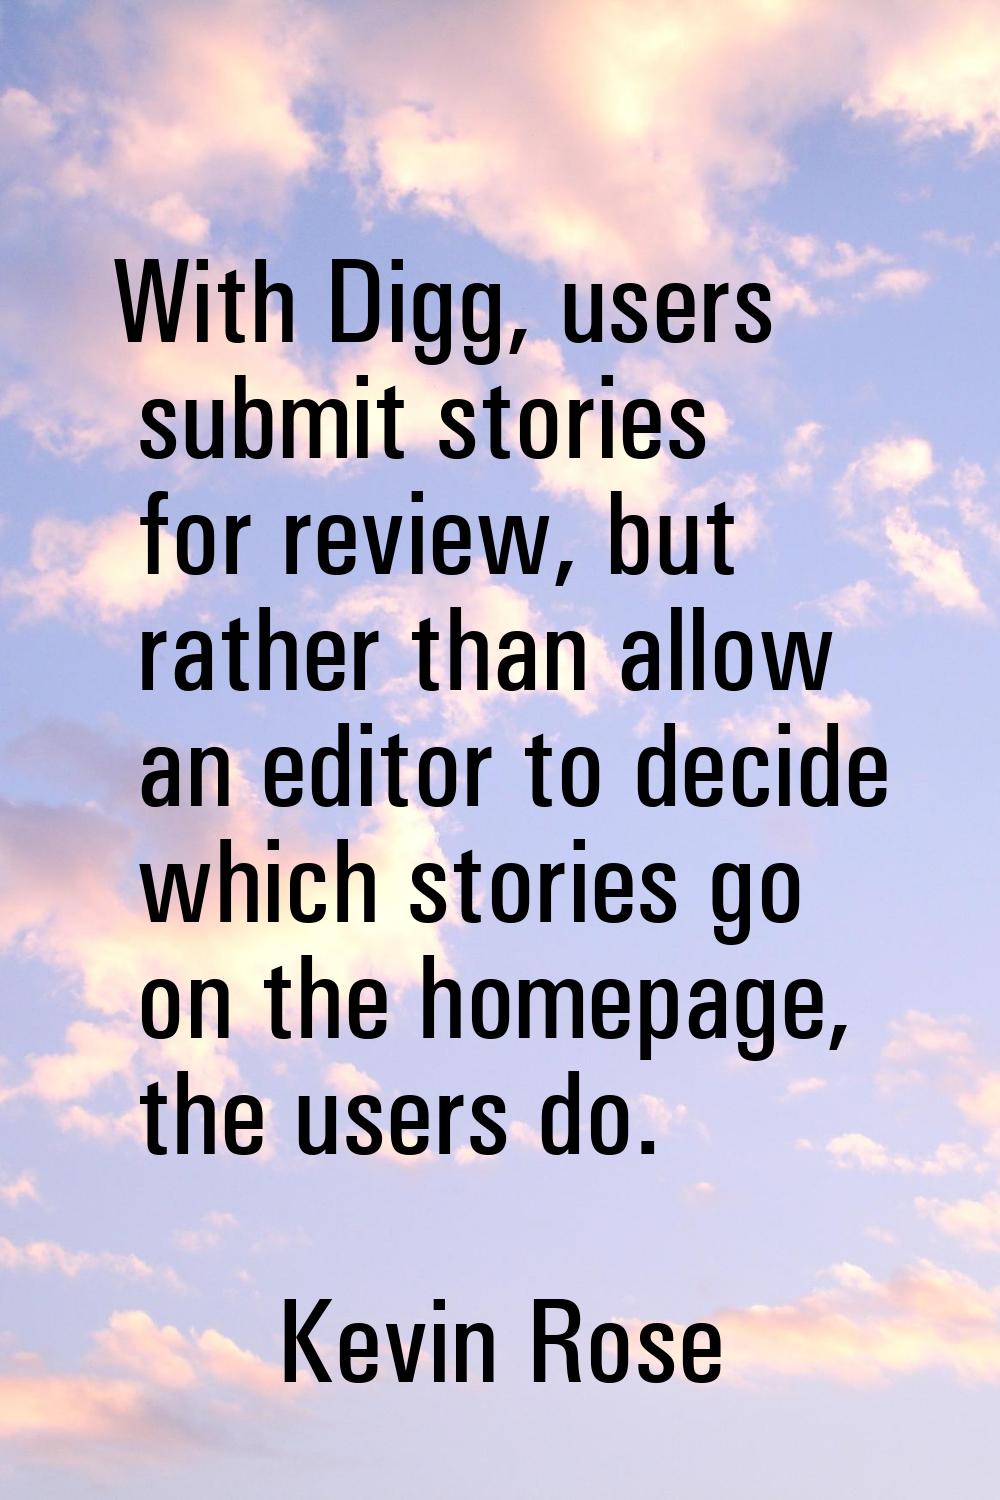 With Digg, users submit stories for review, but rather than allow an editor to decide which stories